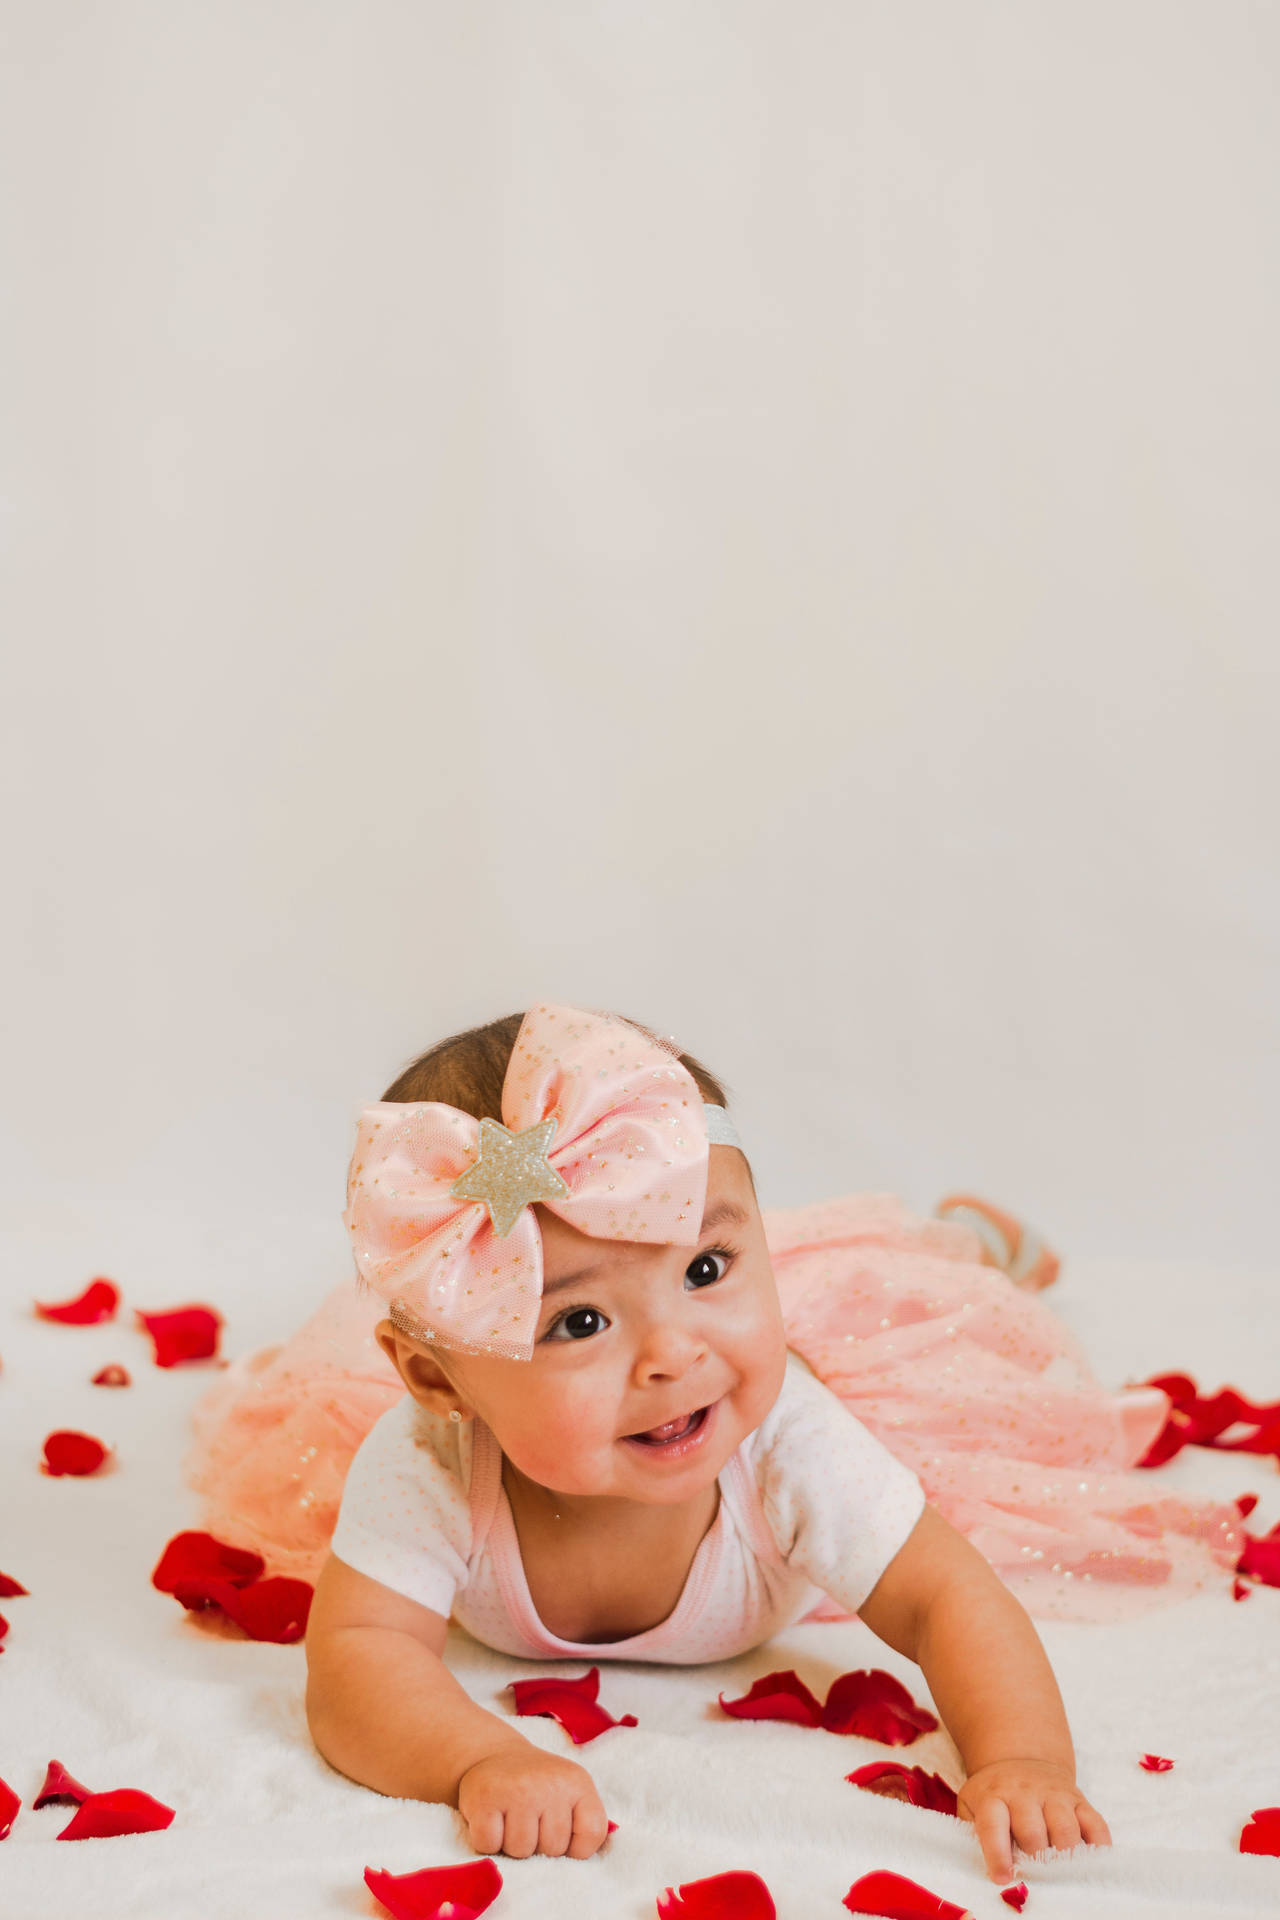 Cute Baby In Pink Dress And Bow